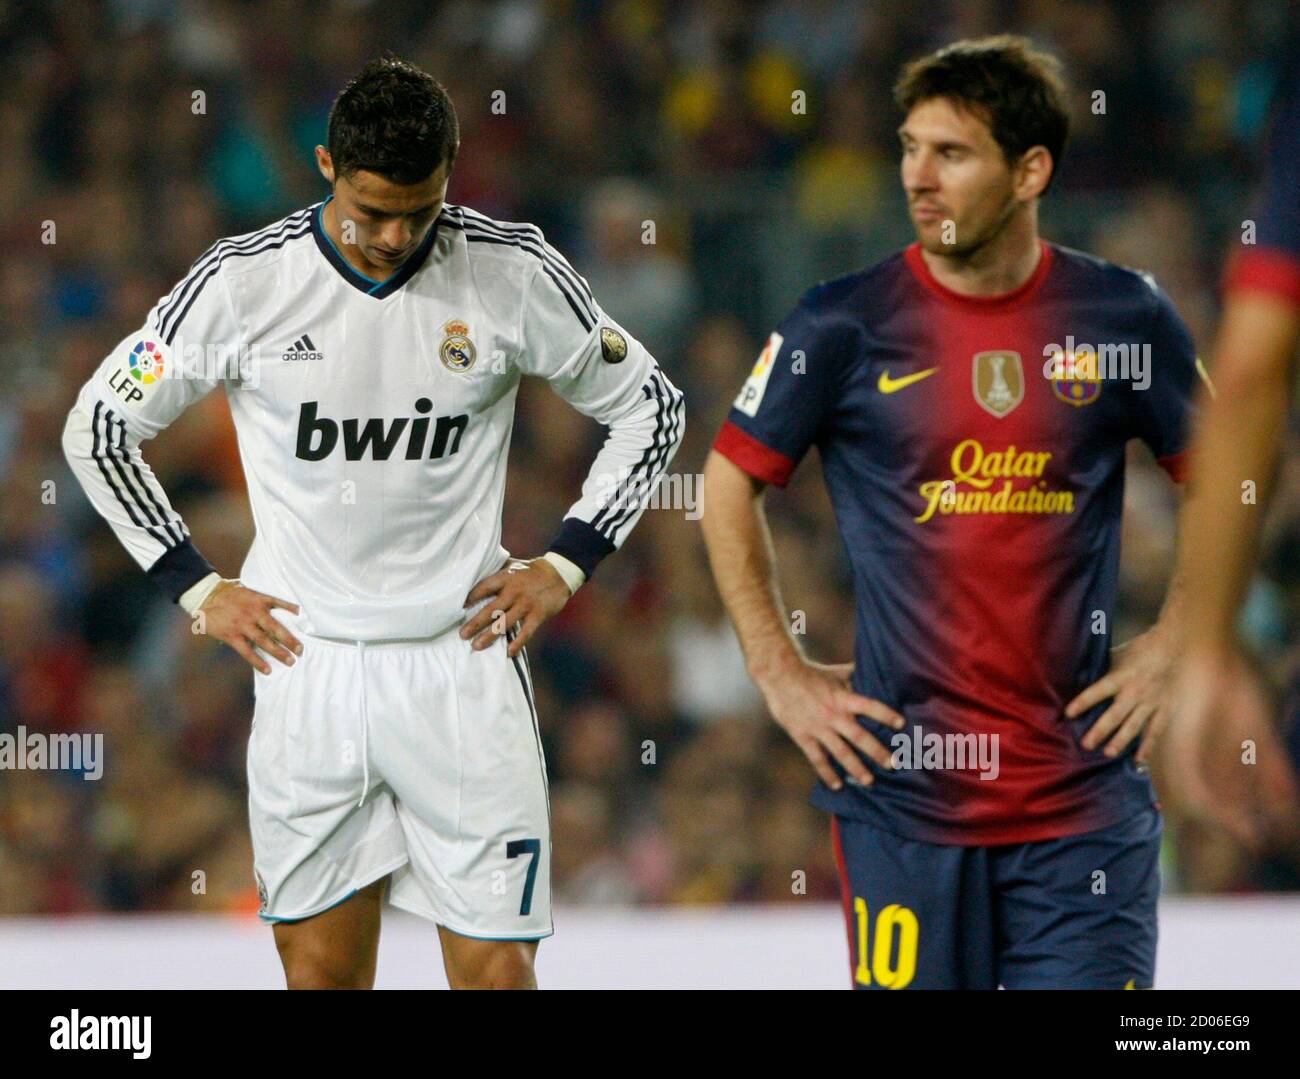 Barcelona's Lionel Messi (R) walks past Real Madrid's Cristiano Ronaldo  during their Spanish first division soccer